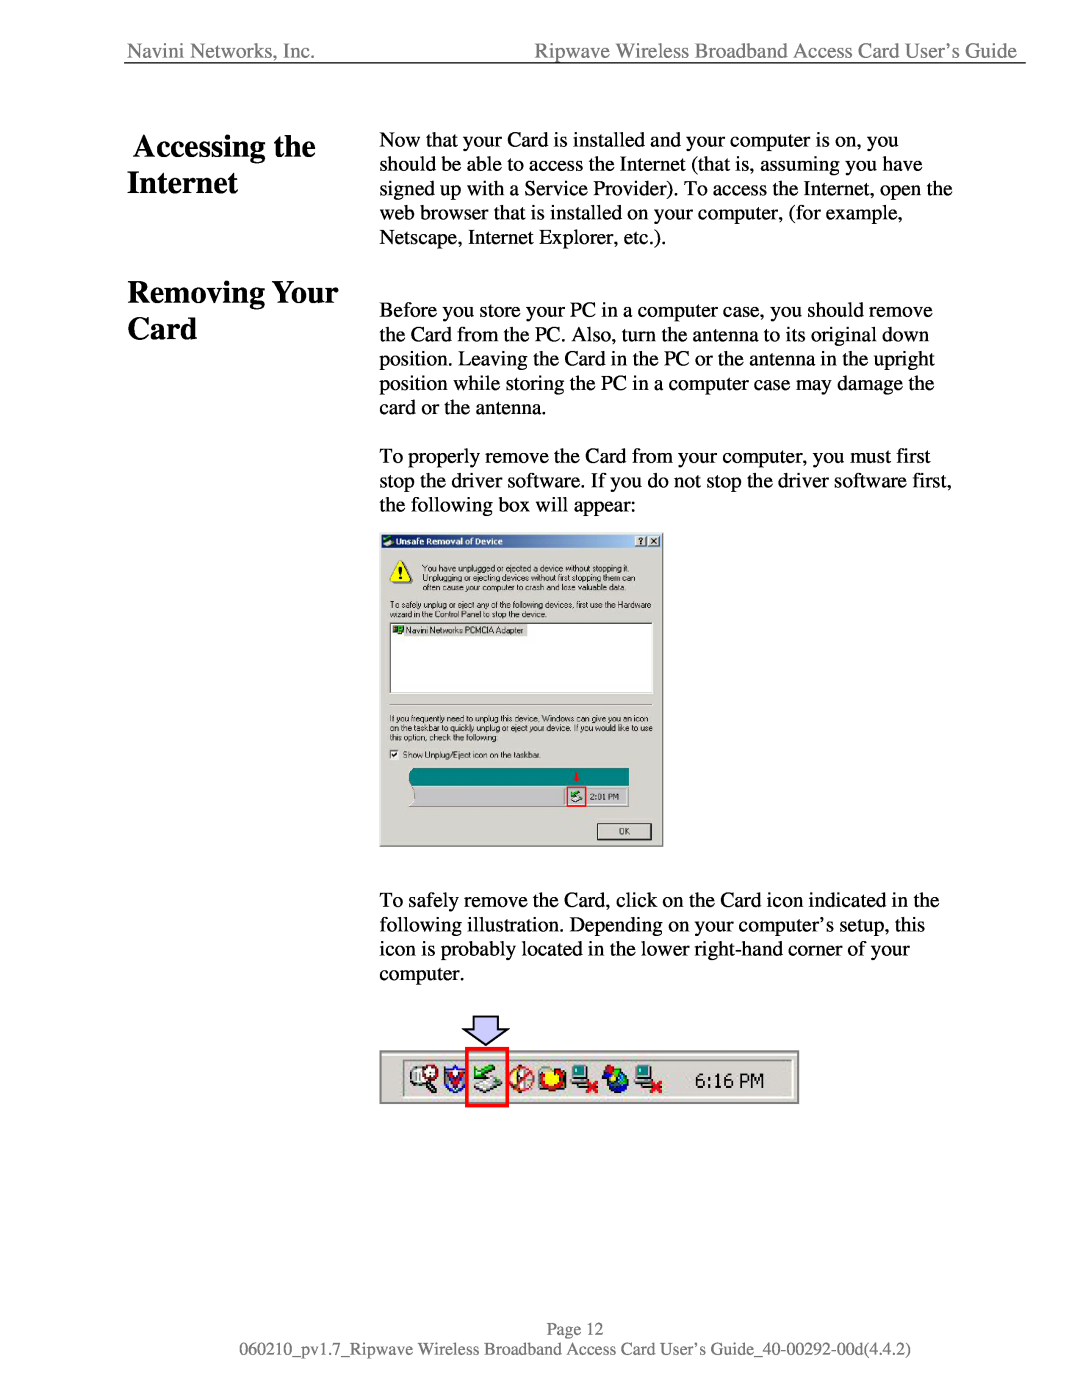 Navini Networks 40-00292-00 manual Accessing the Internet Removing Your Card, Navini Networks, Inc 